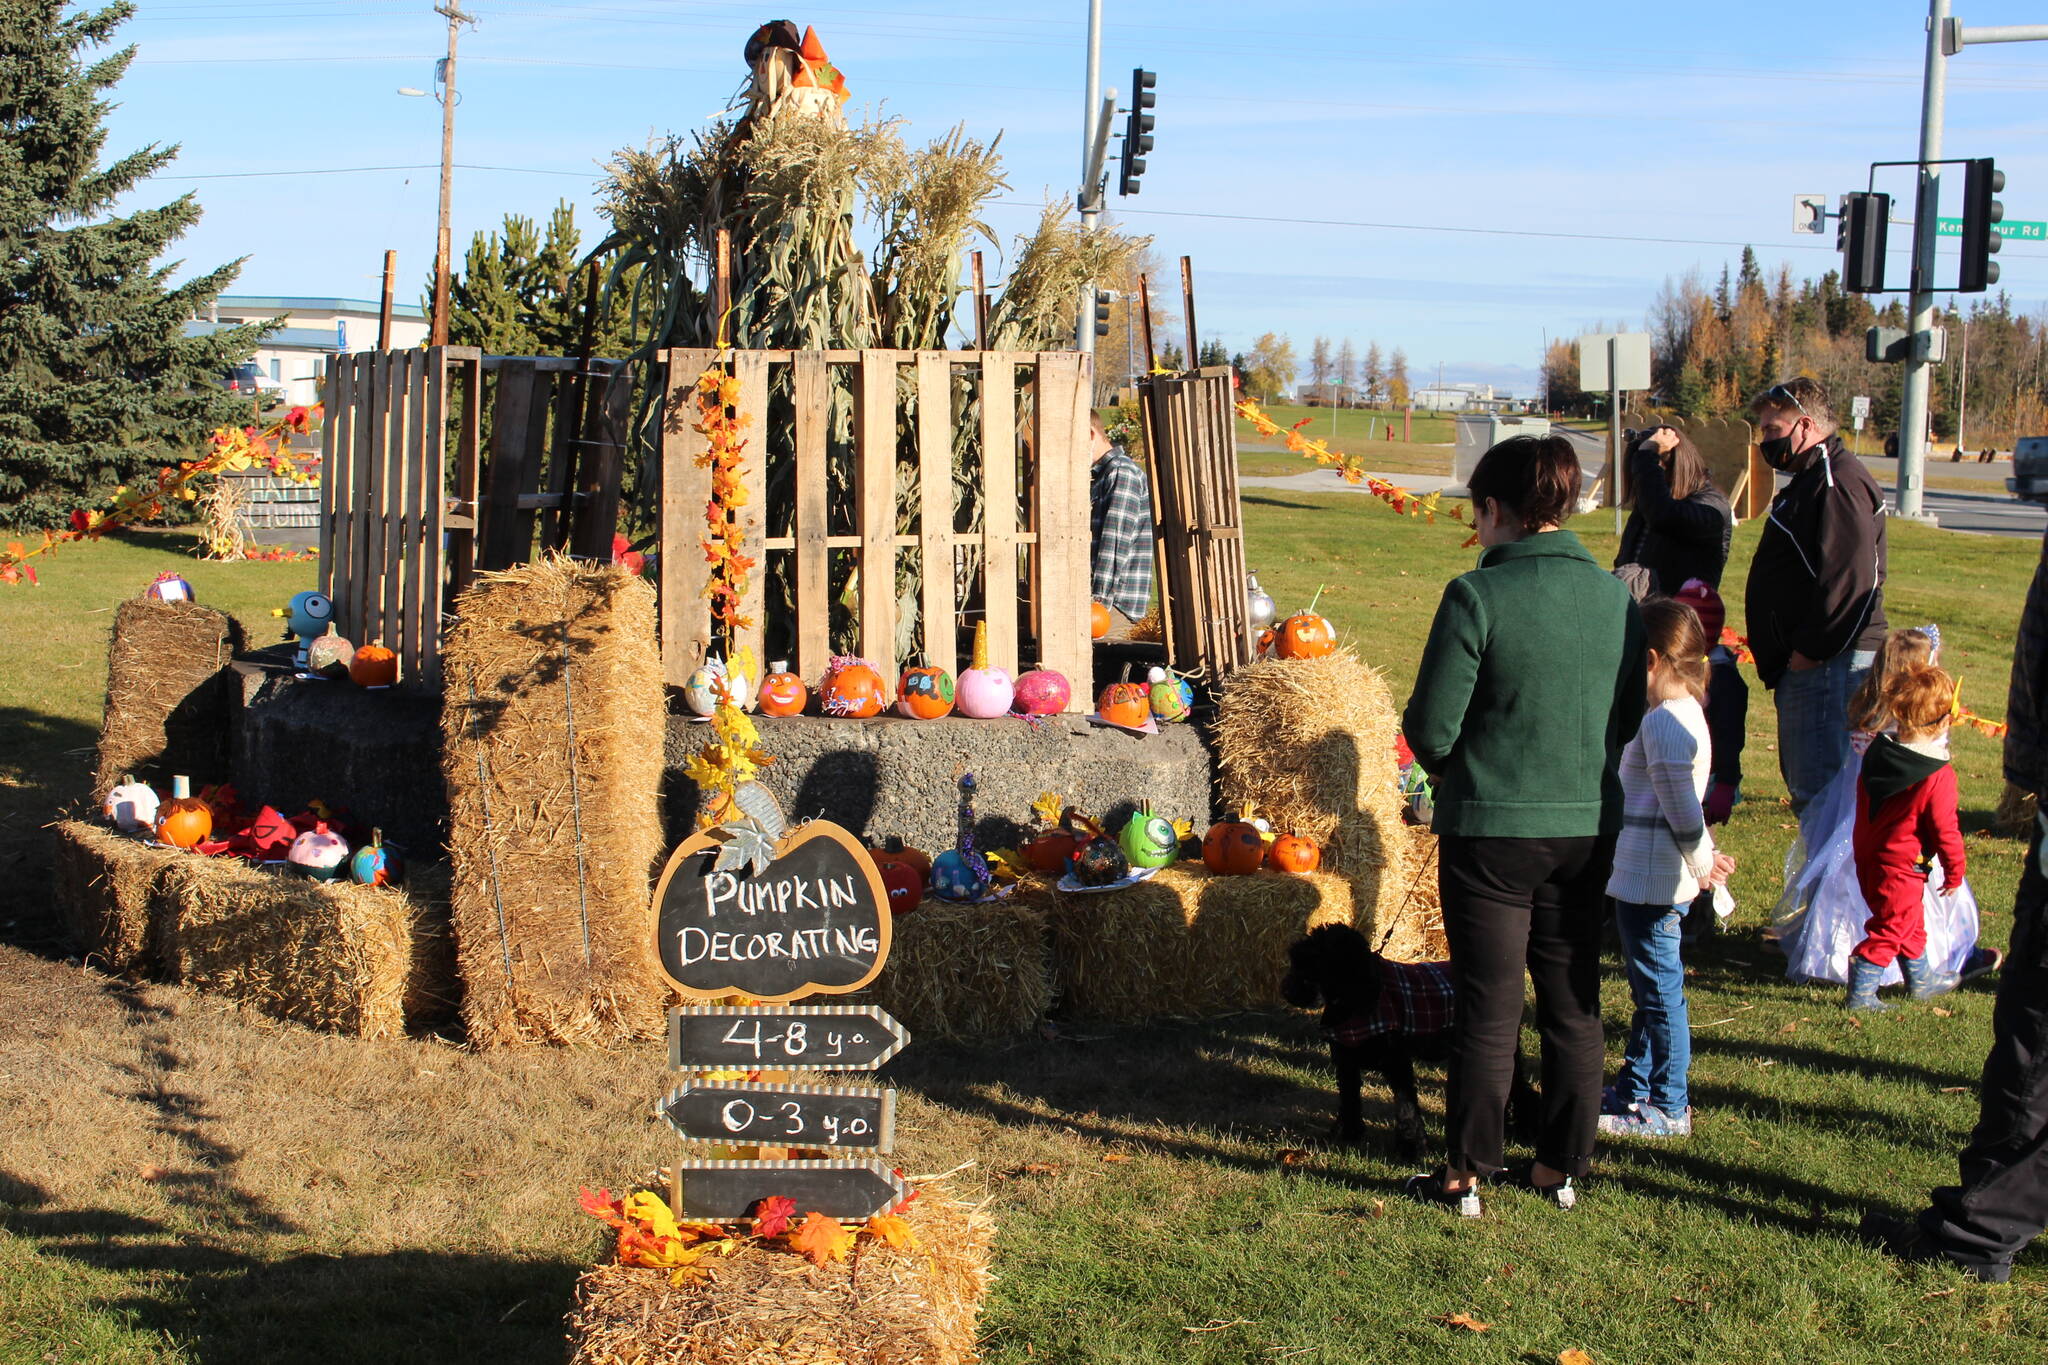 Some of the pumpkins submitted to the pumpkin-decorating contest are seen here during the 5th annual Kenai Fall Pumpkin Festival in Kenai, Alaska, on Oct. 10, 2020. (Photo by Brian Mazurek/Peninsula Clarion file)